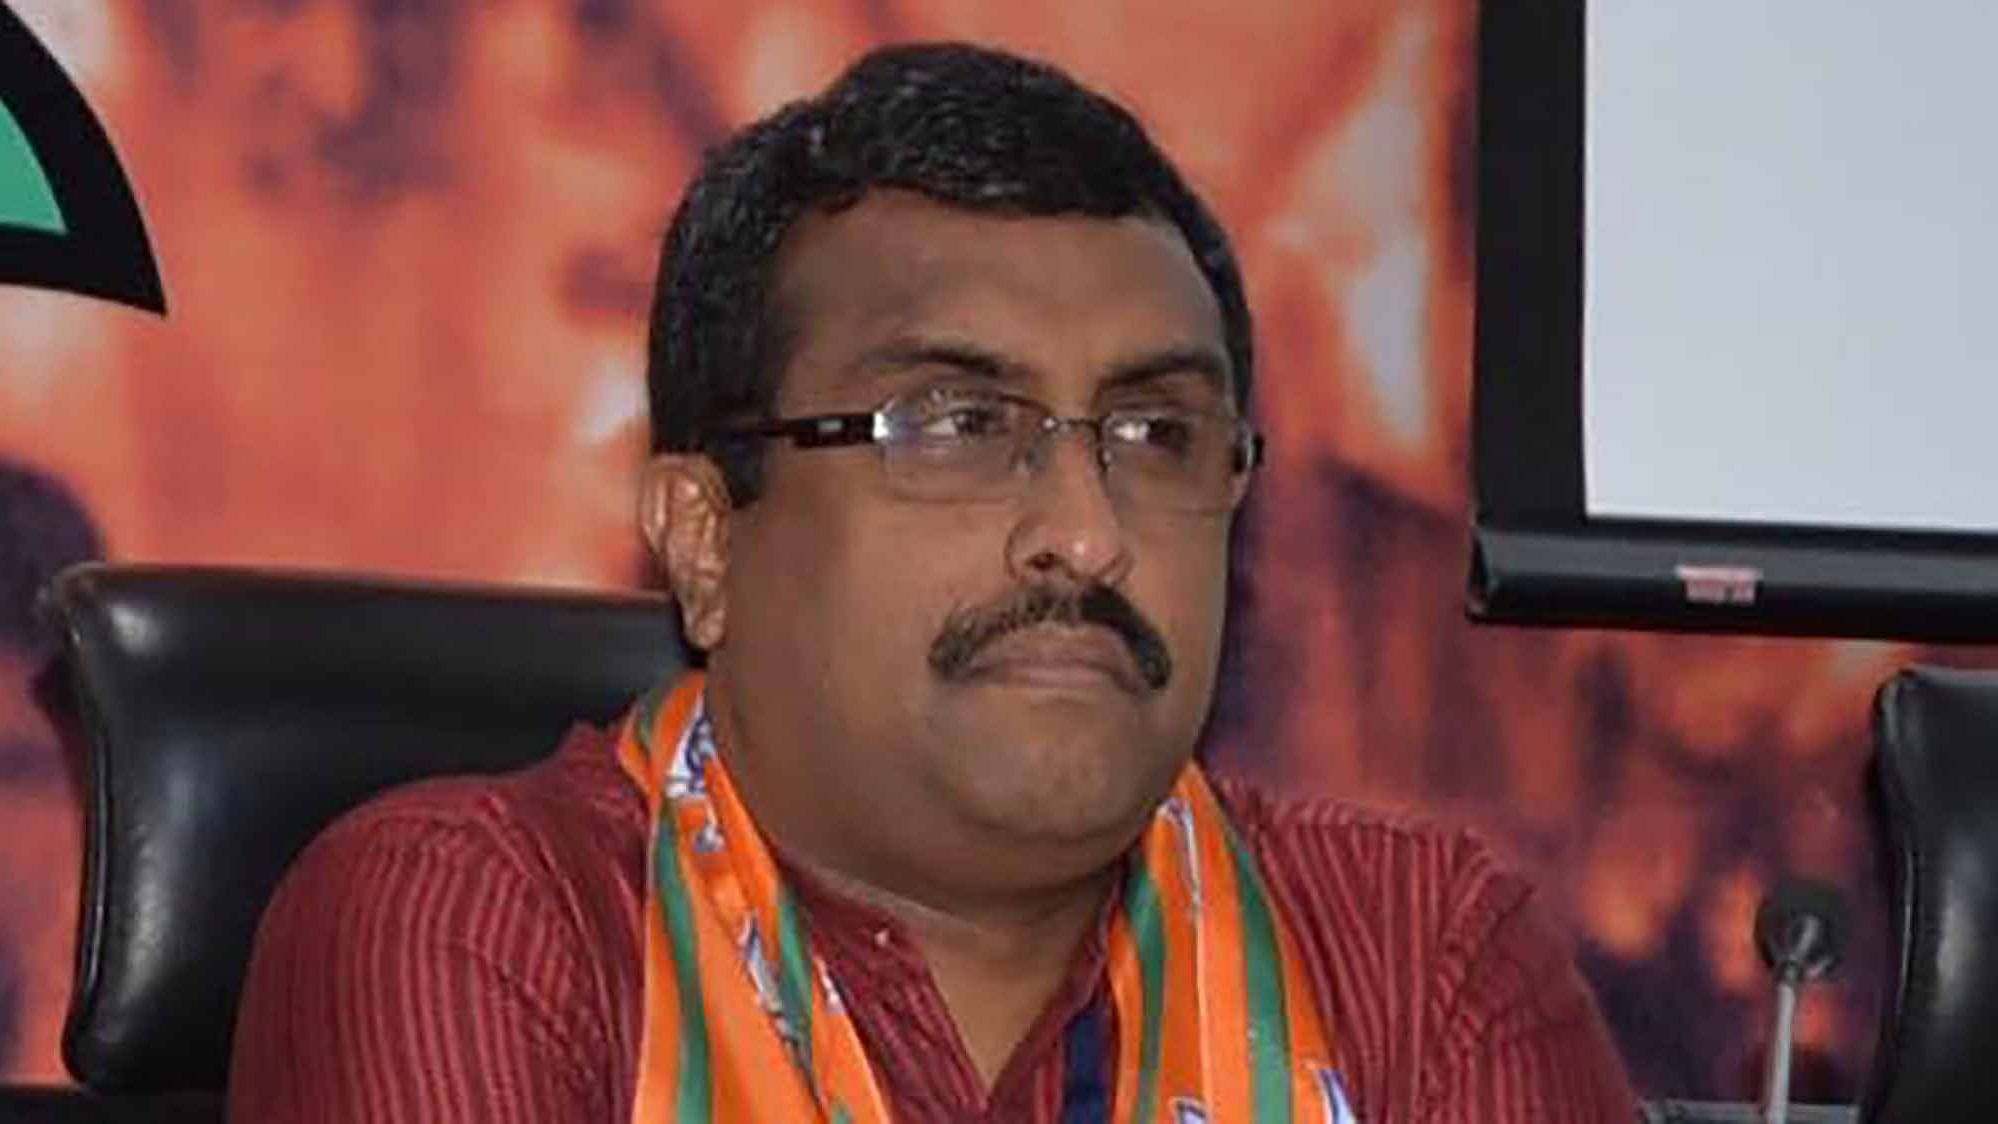 RSS veteran and BJP General Secretary Ram Madhav said the party’s parliamentary board will meet and take a call on who’s to become Tripura’s chief minister.